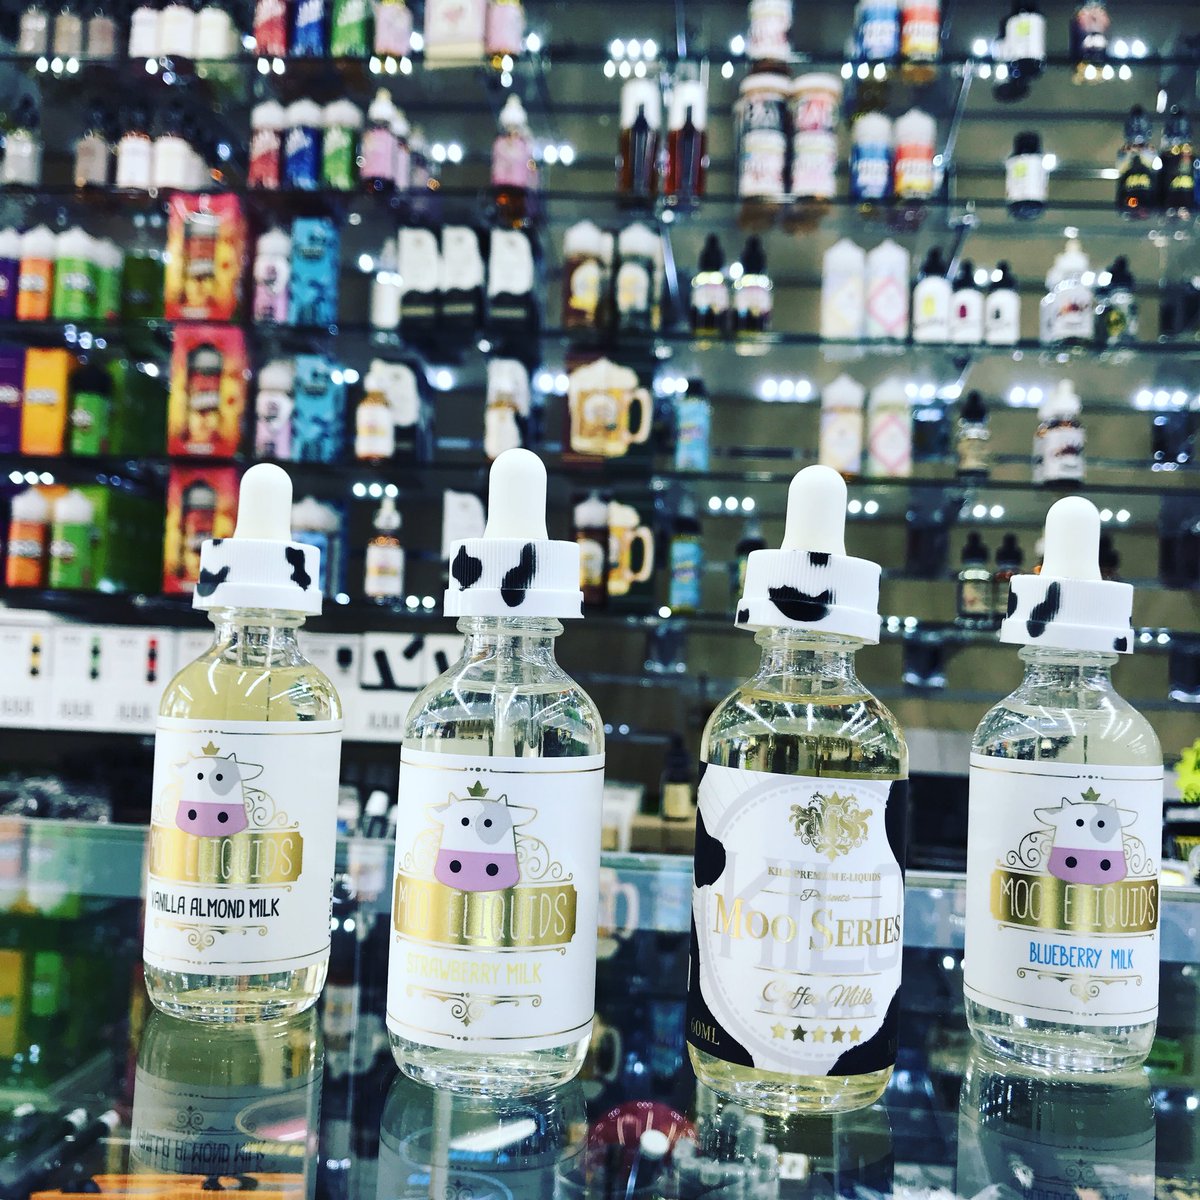 Moo your taste buds over to us and get yourself so if this amazing flavors thanks to @kiloeliquids #calle8 #calle8miami #worldofsmokenvapecalle8 #smokingaccessories #waterpipes #bestsmokingselection #bubblers #bestsmokingbrands #chilling #ilovesmoke #smoking #smokinggadgets